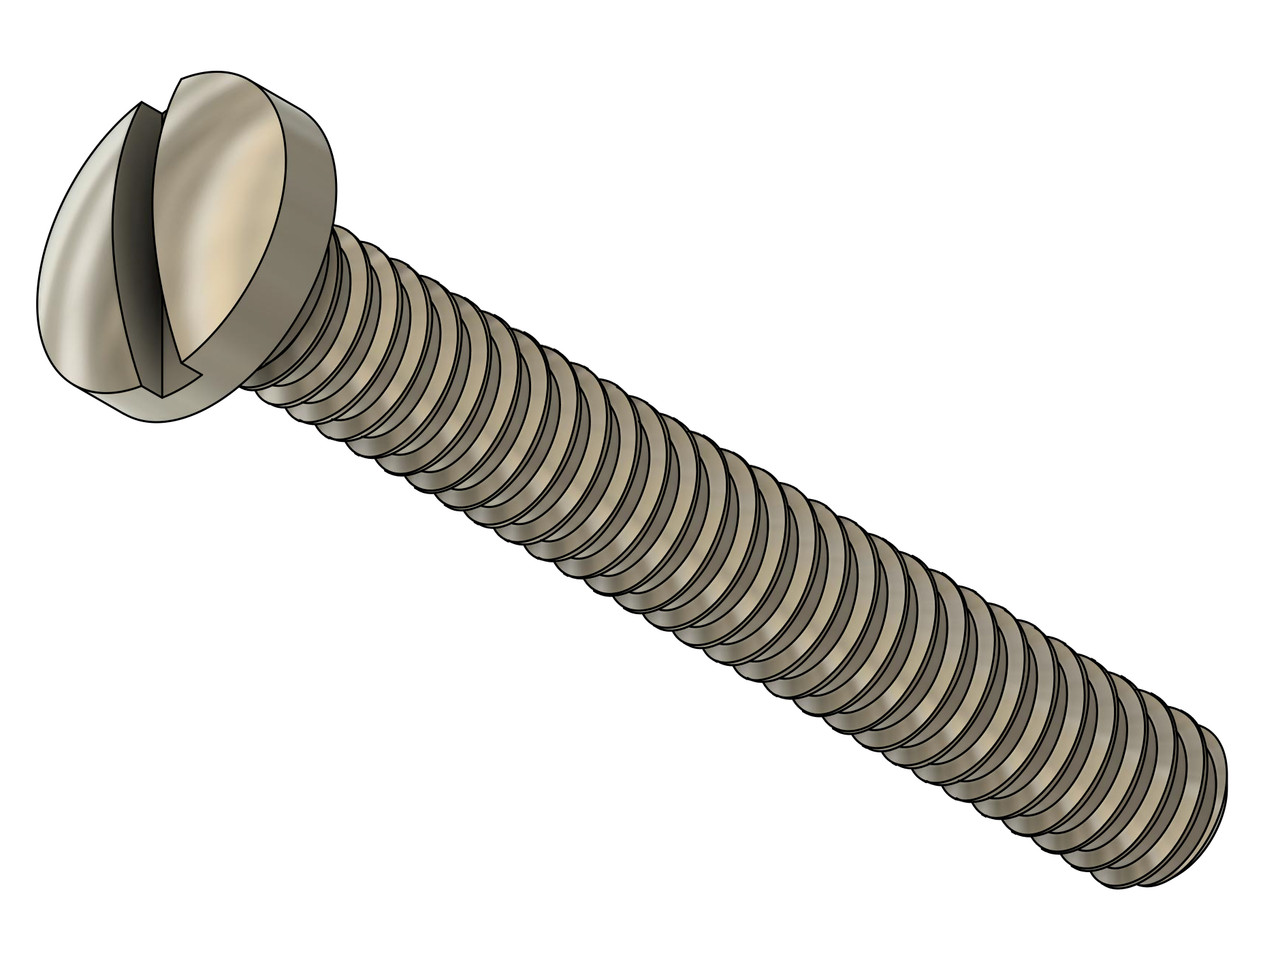 Machine Screw, Pan Head, Special,
Thread M1.6
Pitch .35mm
Head diameter 2.5mm
Threaded Length 9.mm 
Overall Length 10mm
Material Nickel Silver; a copper alloy superior to brass.  Finish Color "Silver"
Price is for 100 count package with